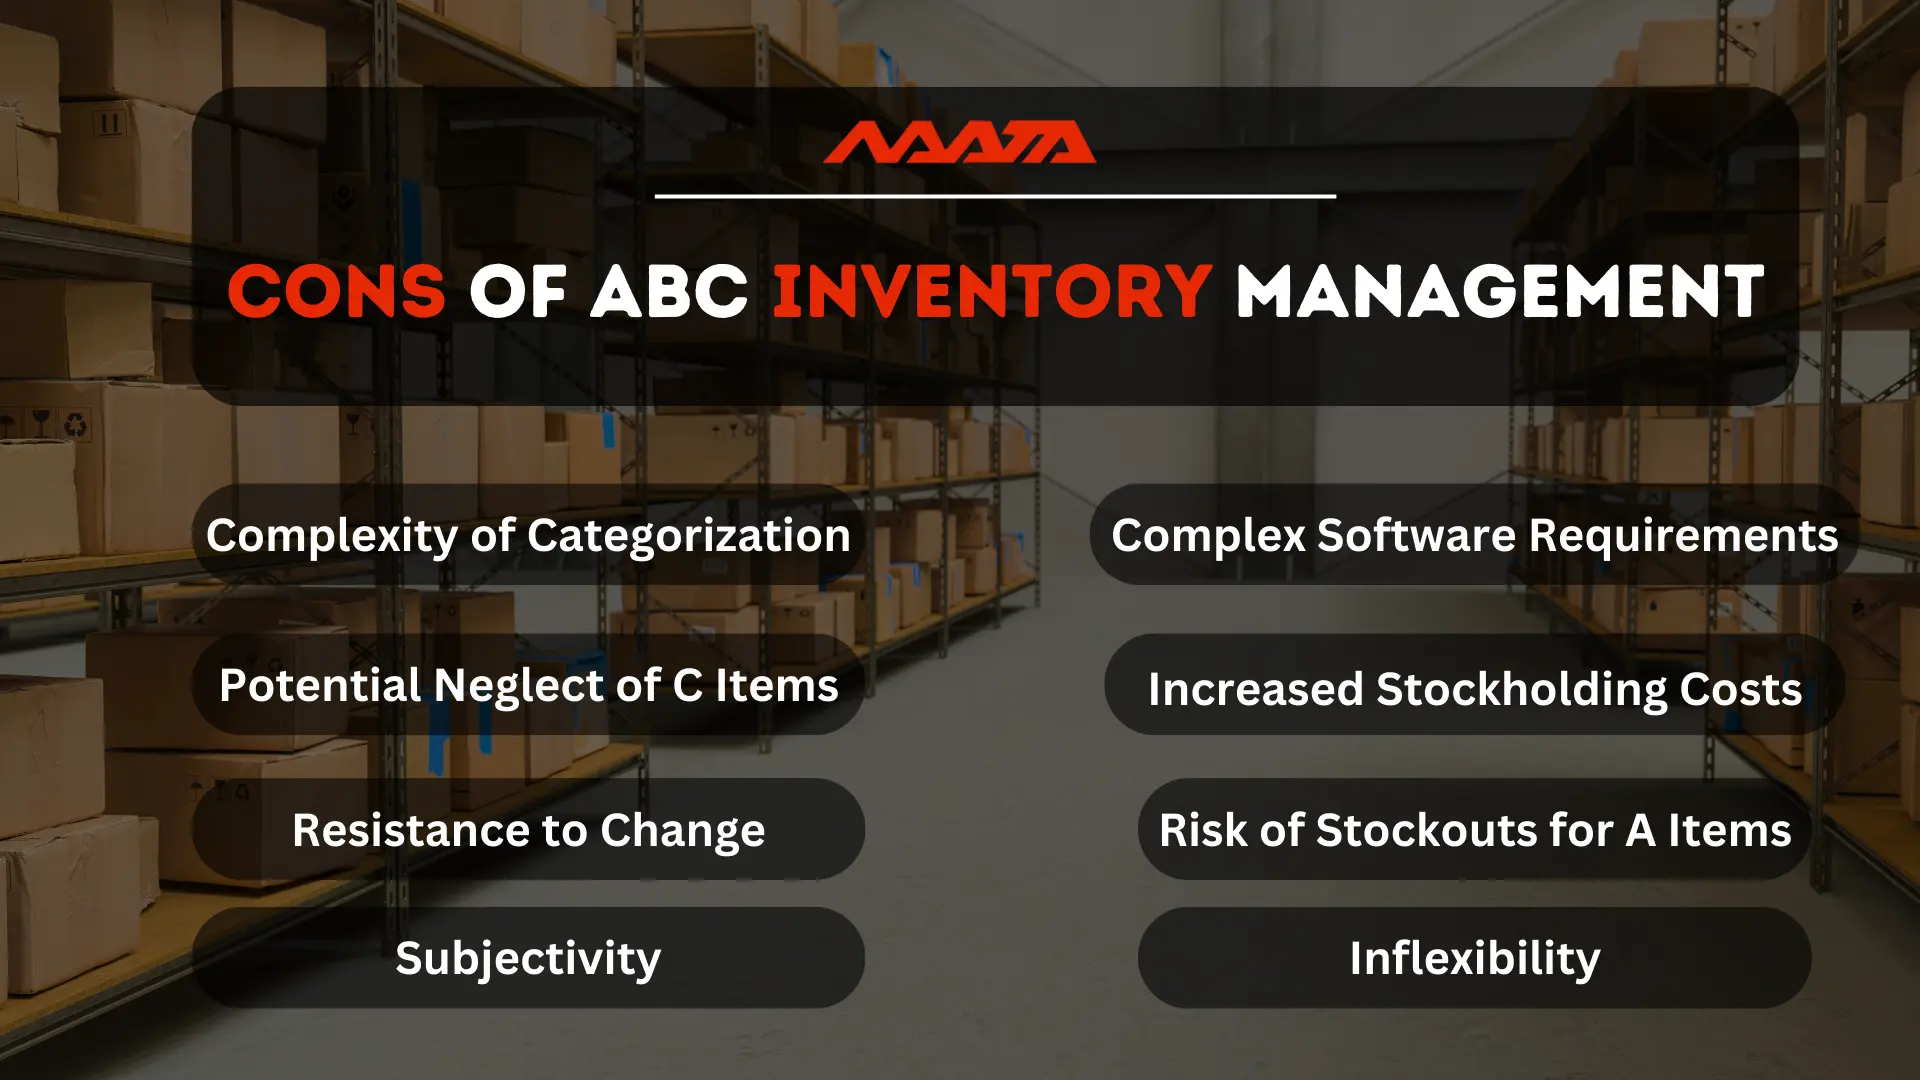 Cons of ABC Inventory Management